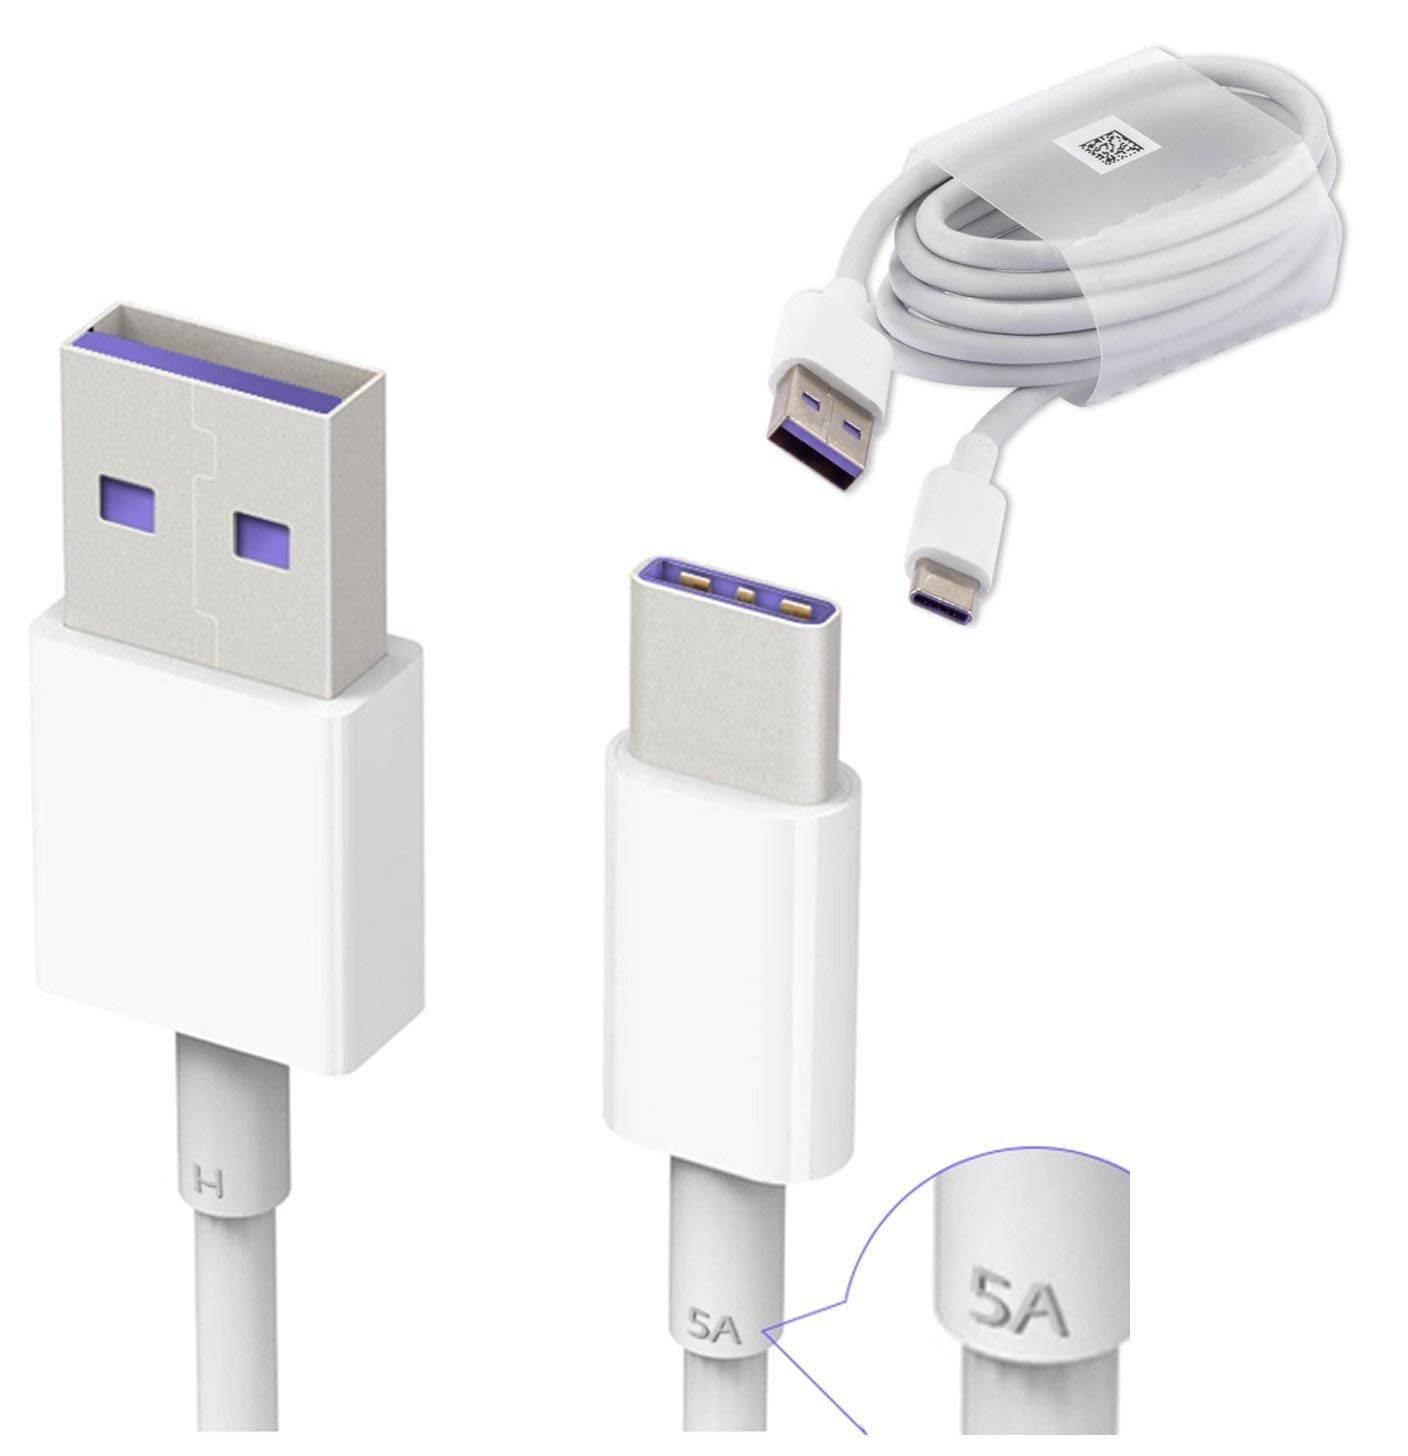 Genuine Official HUAWEI HL1289 5A USB 3.1 Type C Superfast Charging Data Cable for HUAWEI P9/ P9 Plus/ P10/ P10 Plus/Mate 9/ Nova/Nova 2 - White (Bulk Packed, Frustration Free Packaging)